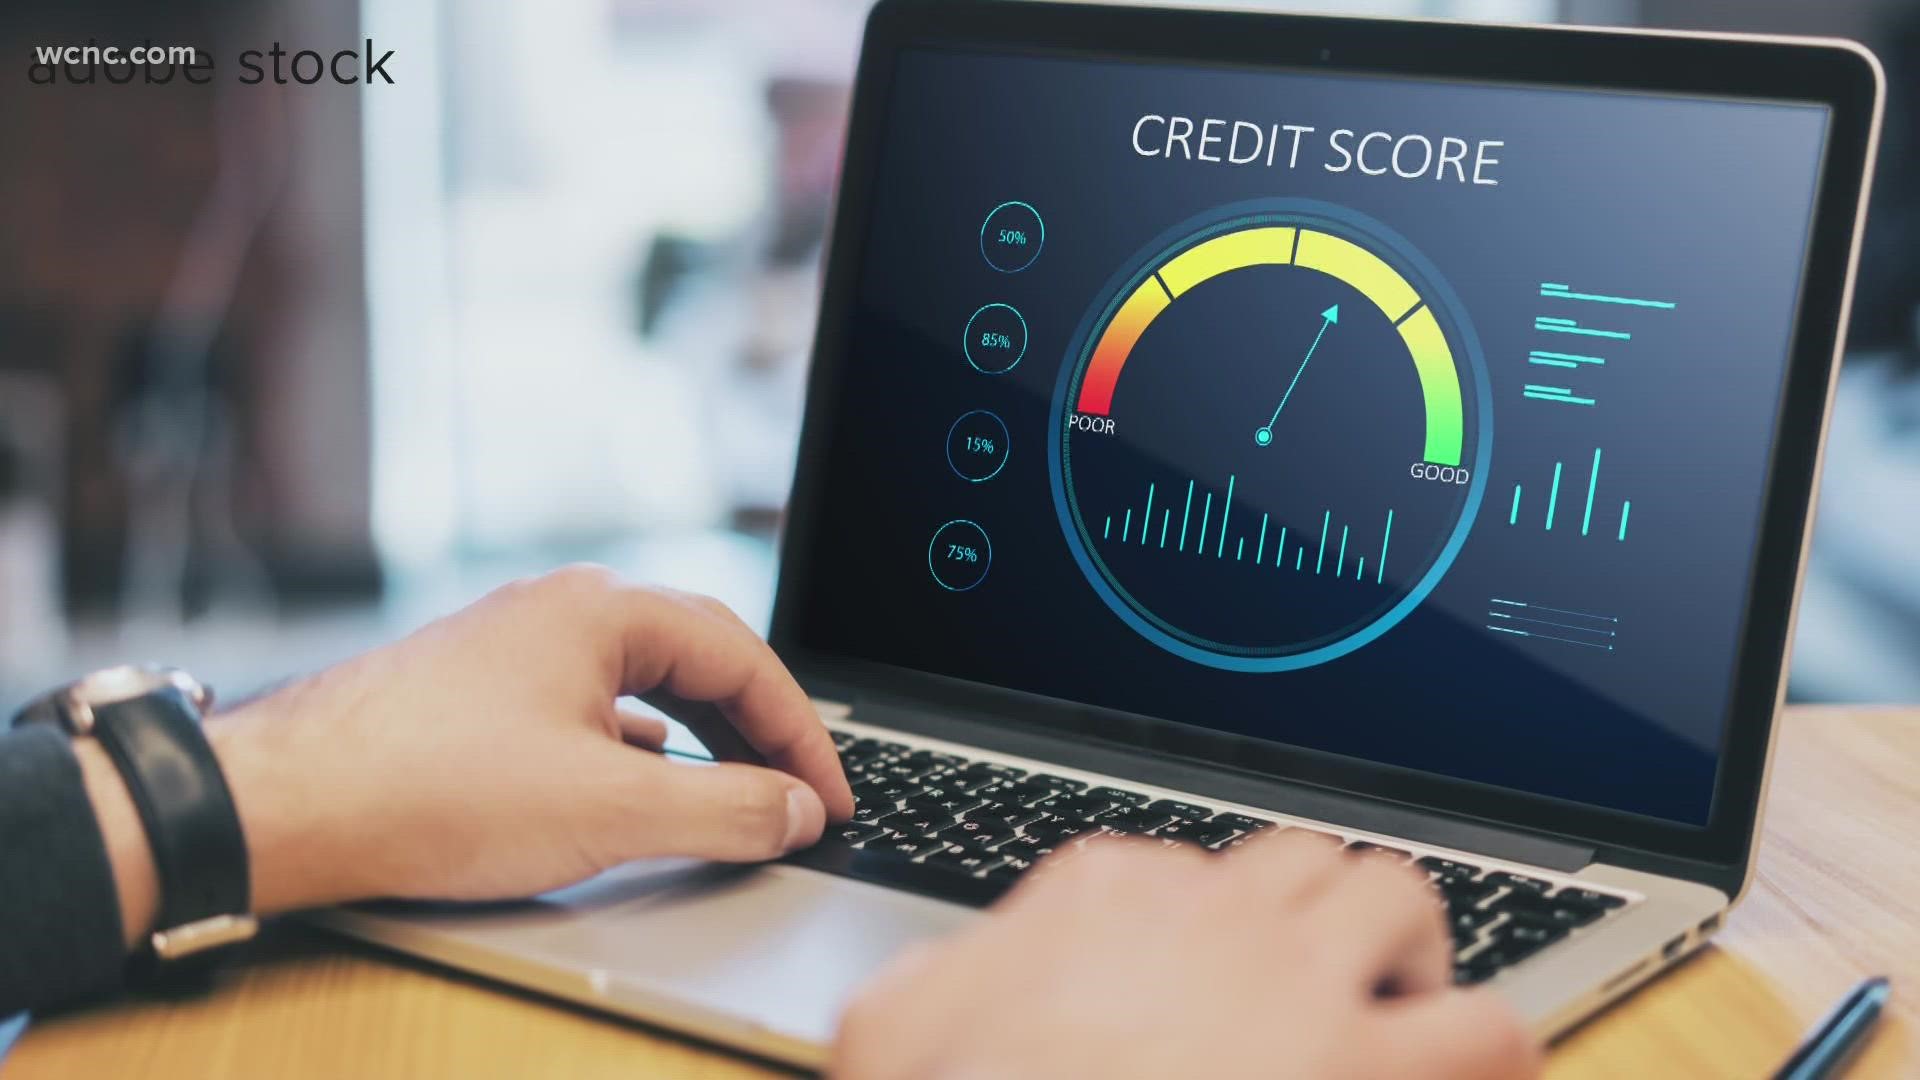 You may have gotten an email or seen it on the internet to check your credit score for free, but some are wondering if that will hurt your credit.